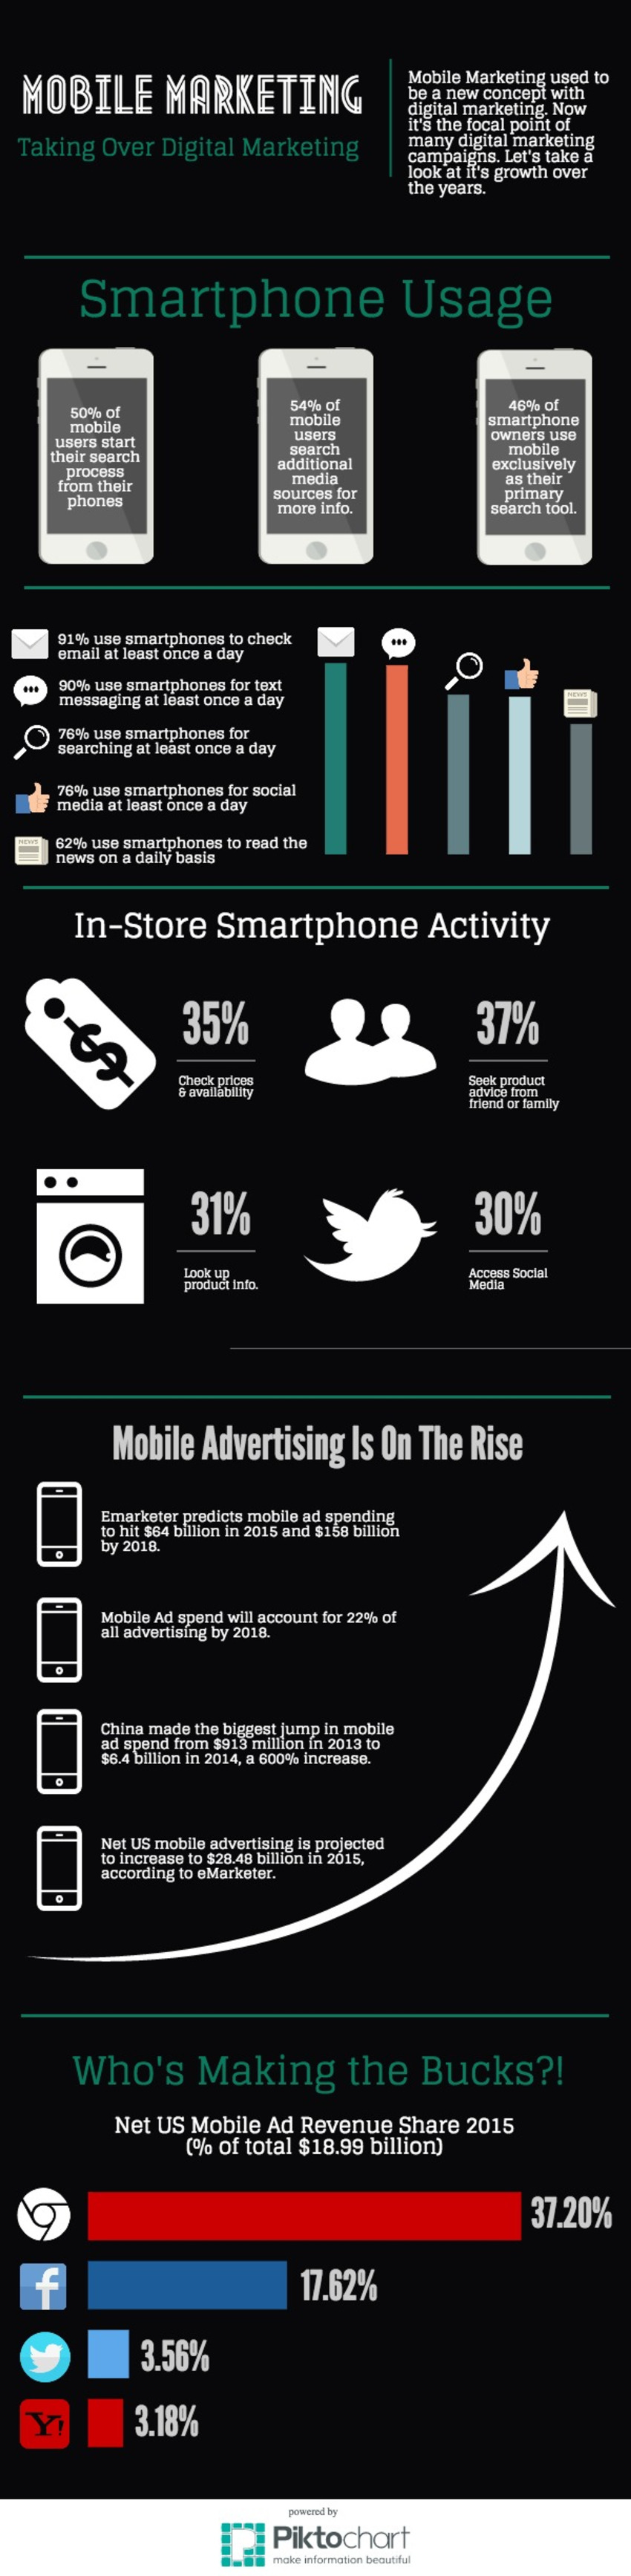 Infographic: Mobile Marketing is Taking Over Digital Marketing | Mobile Marketing Watch | The MarTech Digest | Scoop.it